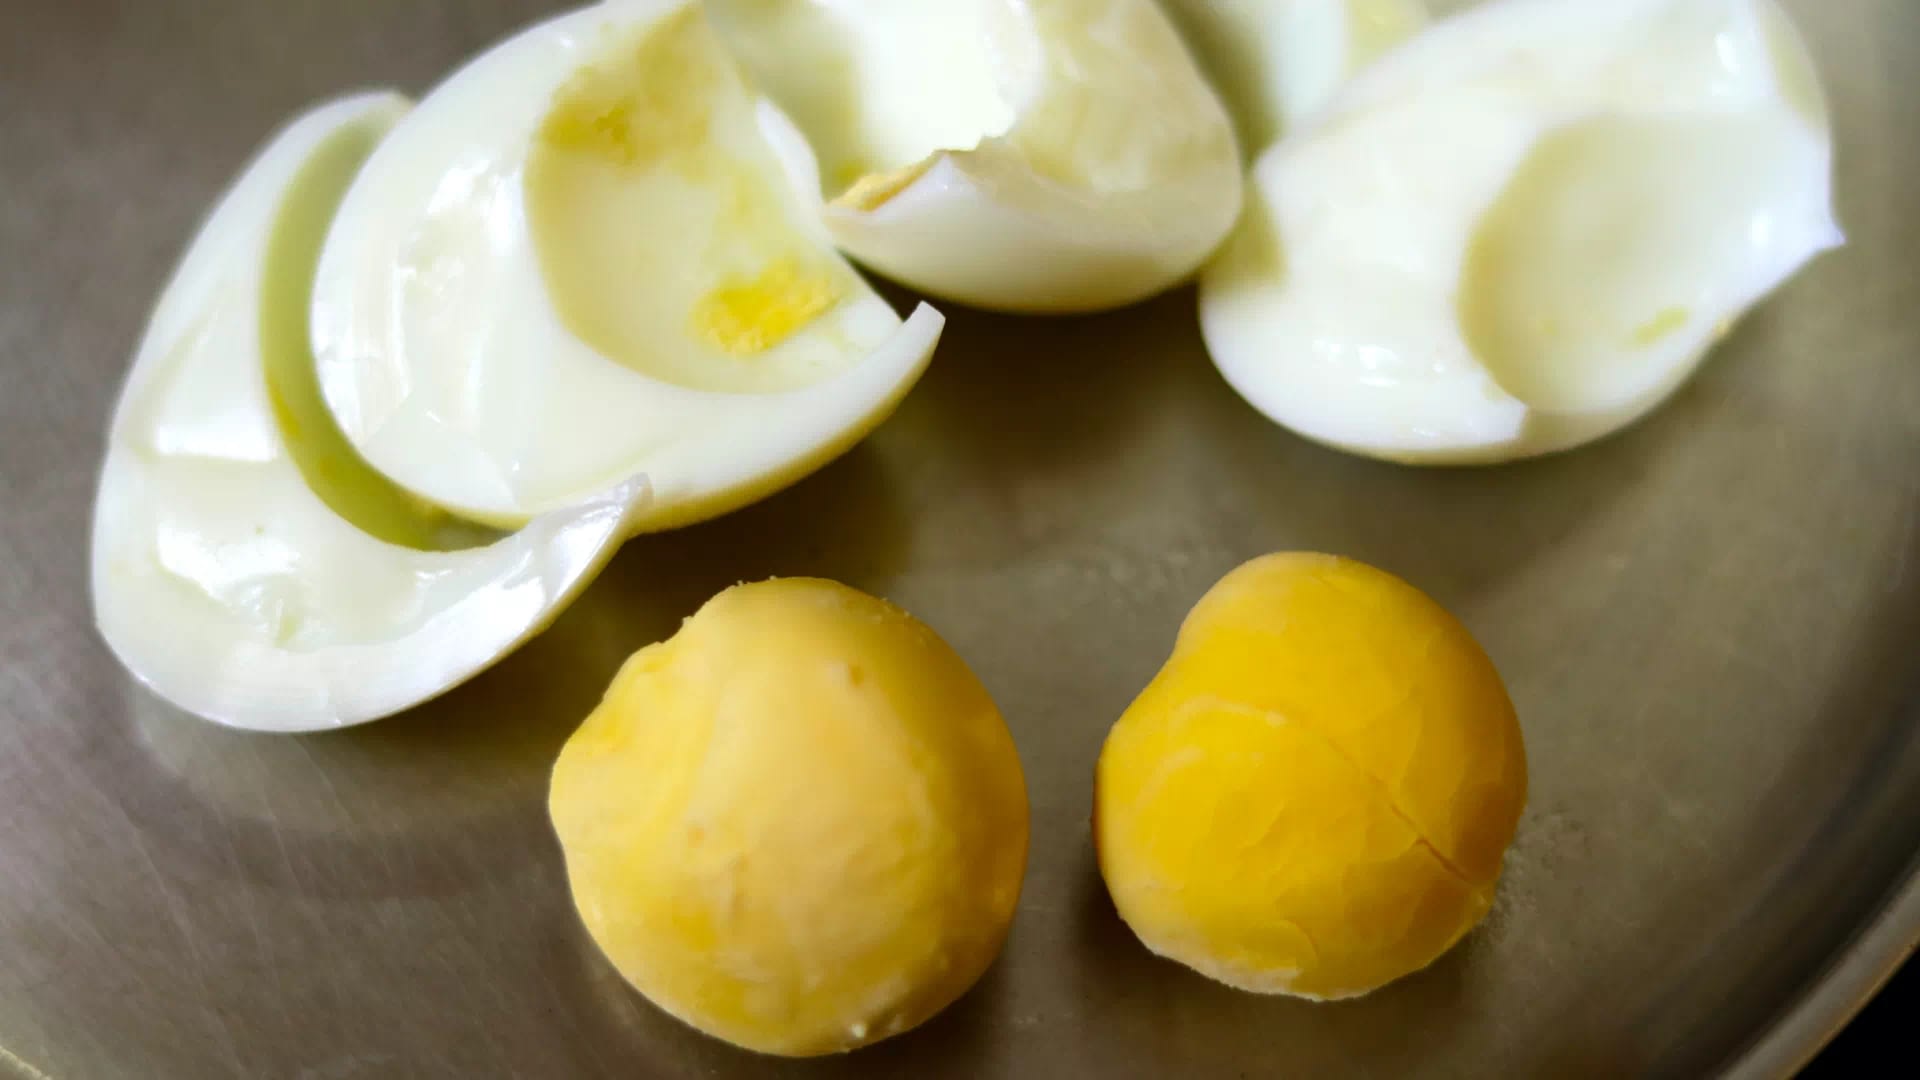 After boiled remove yolk from egg